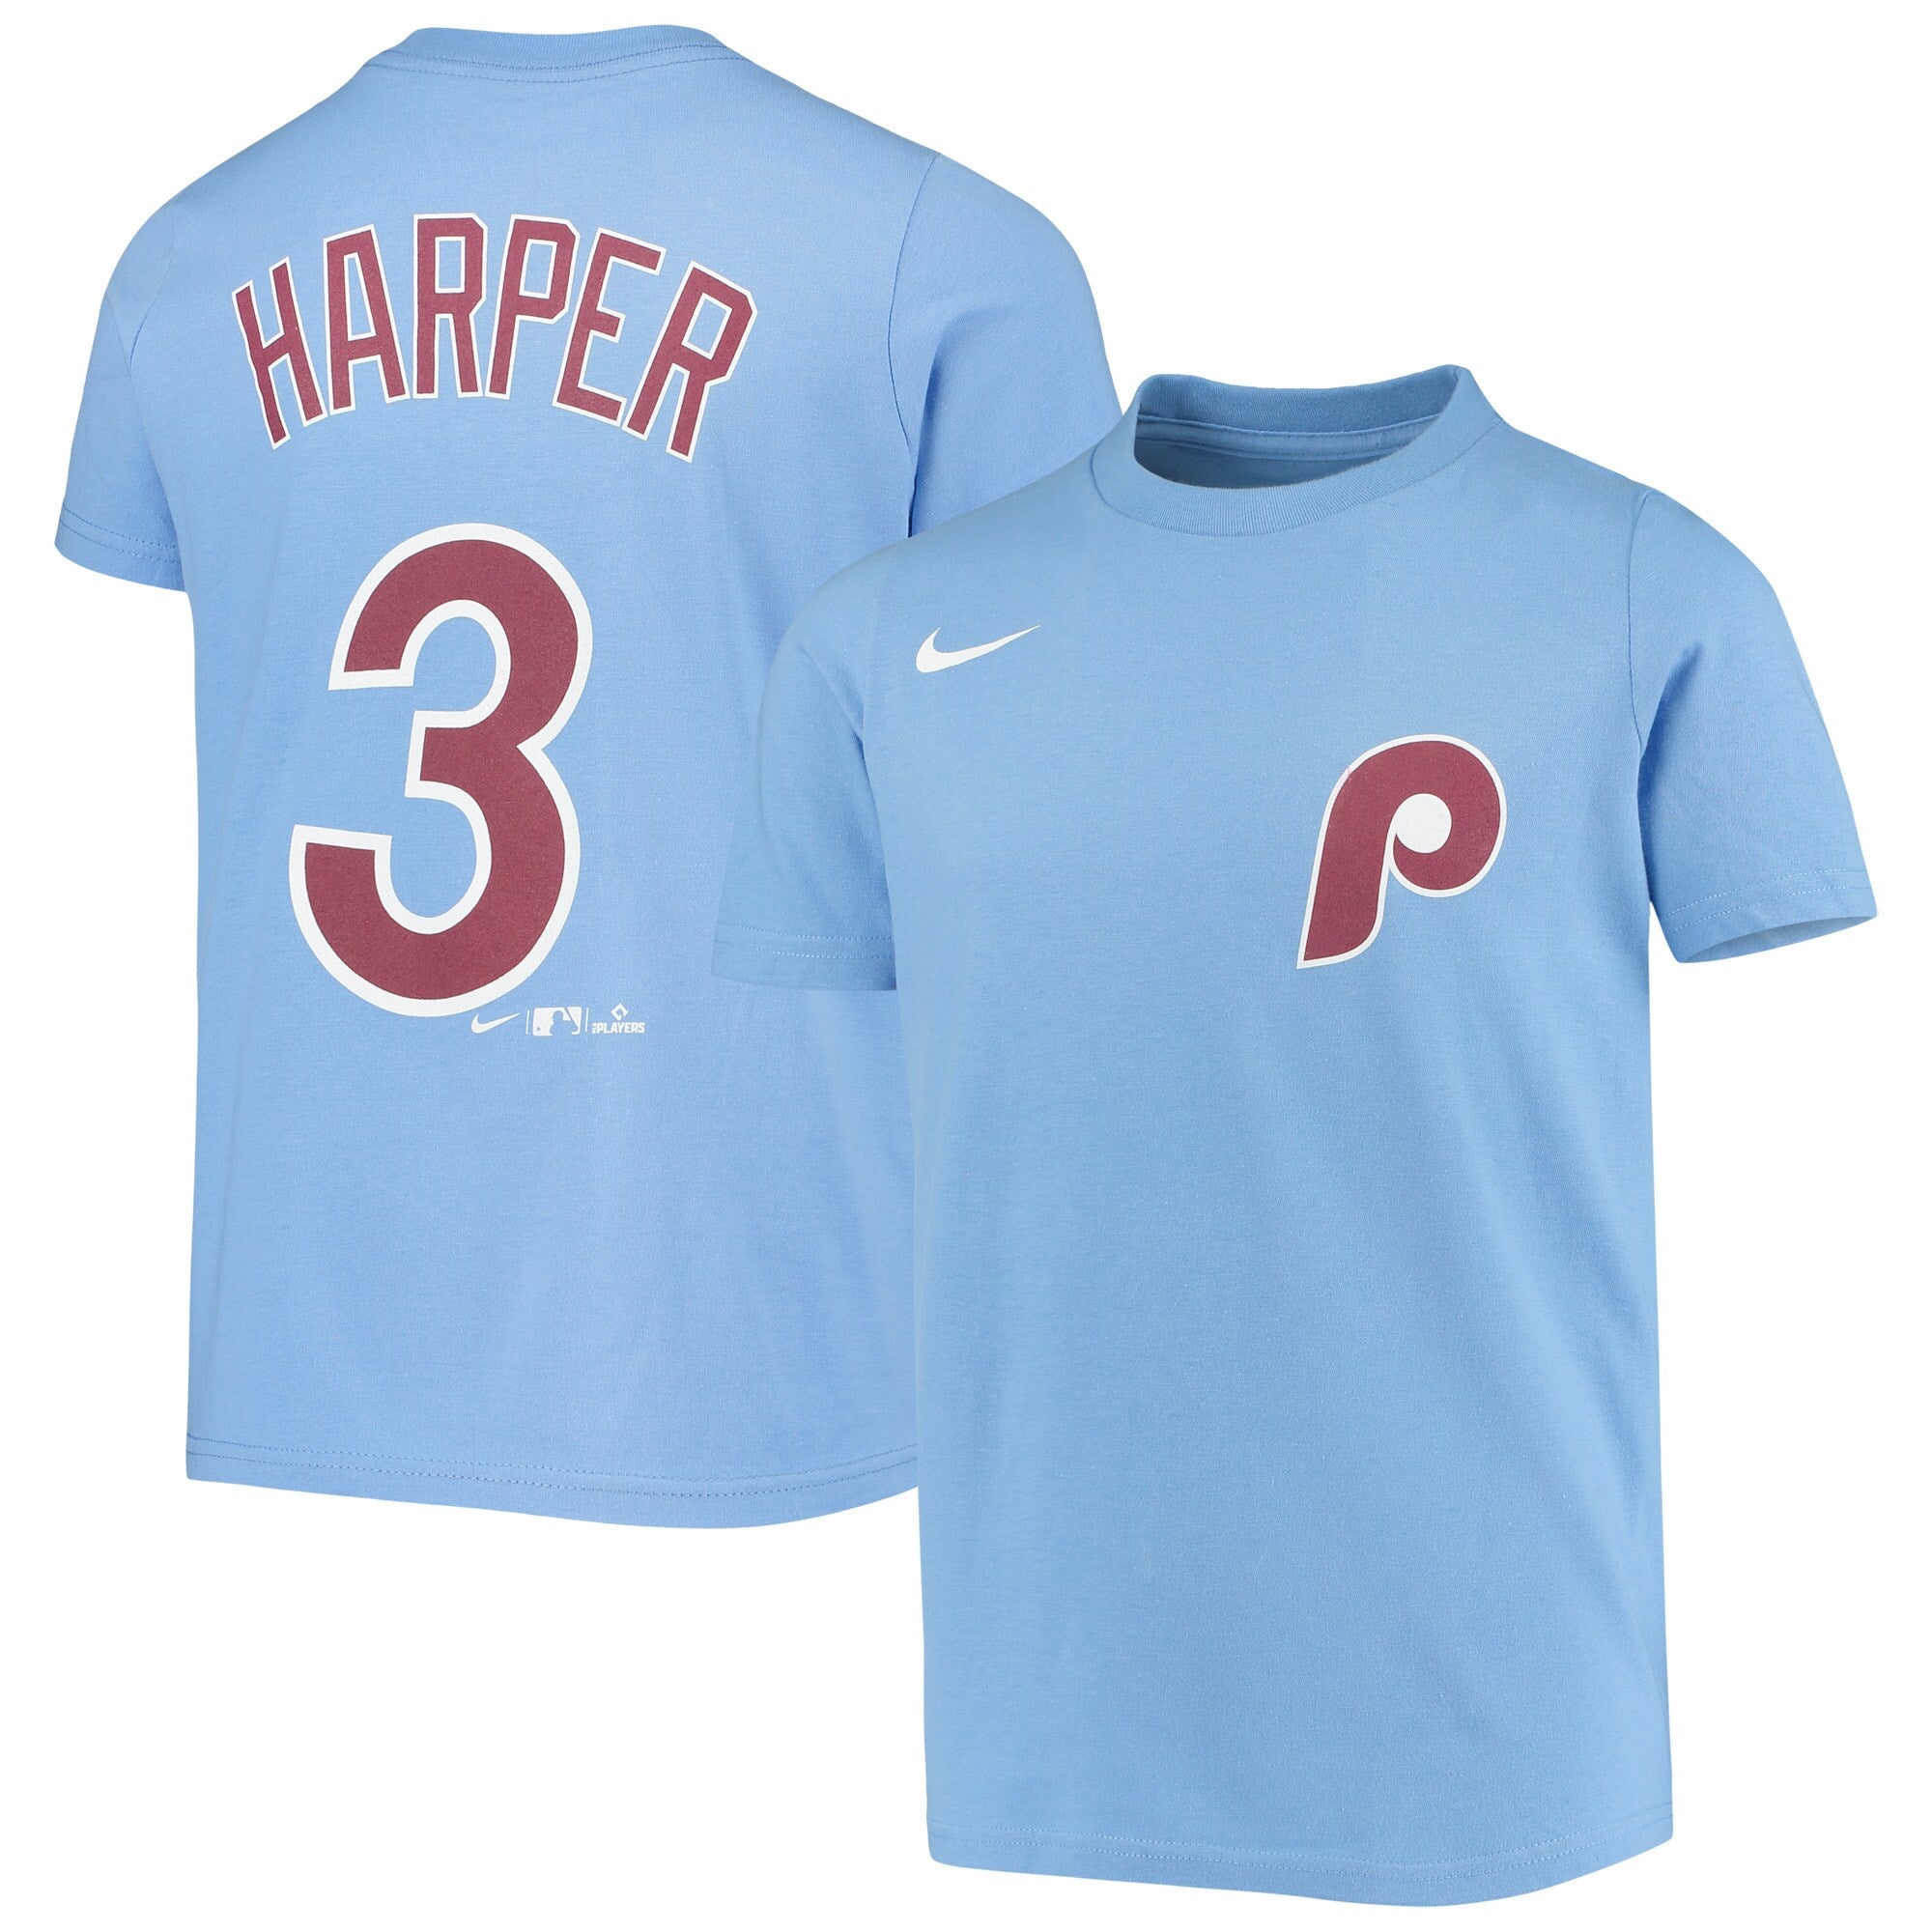 Youth Nike Bryce Harper Light Blue Philadelphia Phillies Player Name & Number T-Shirt, Size XL at Nordstrom